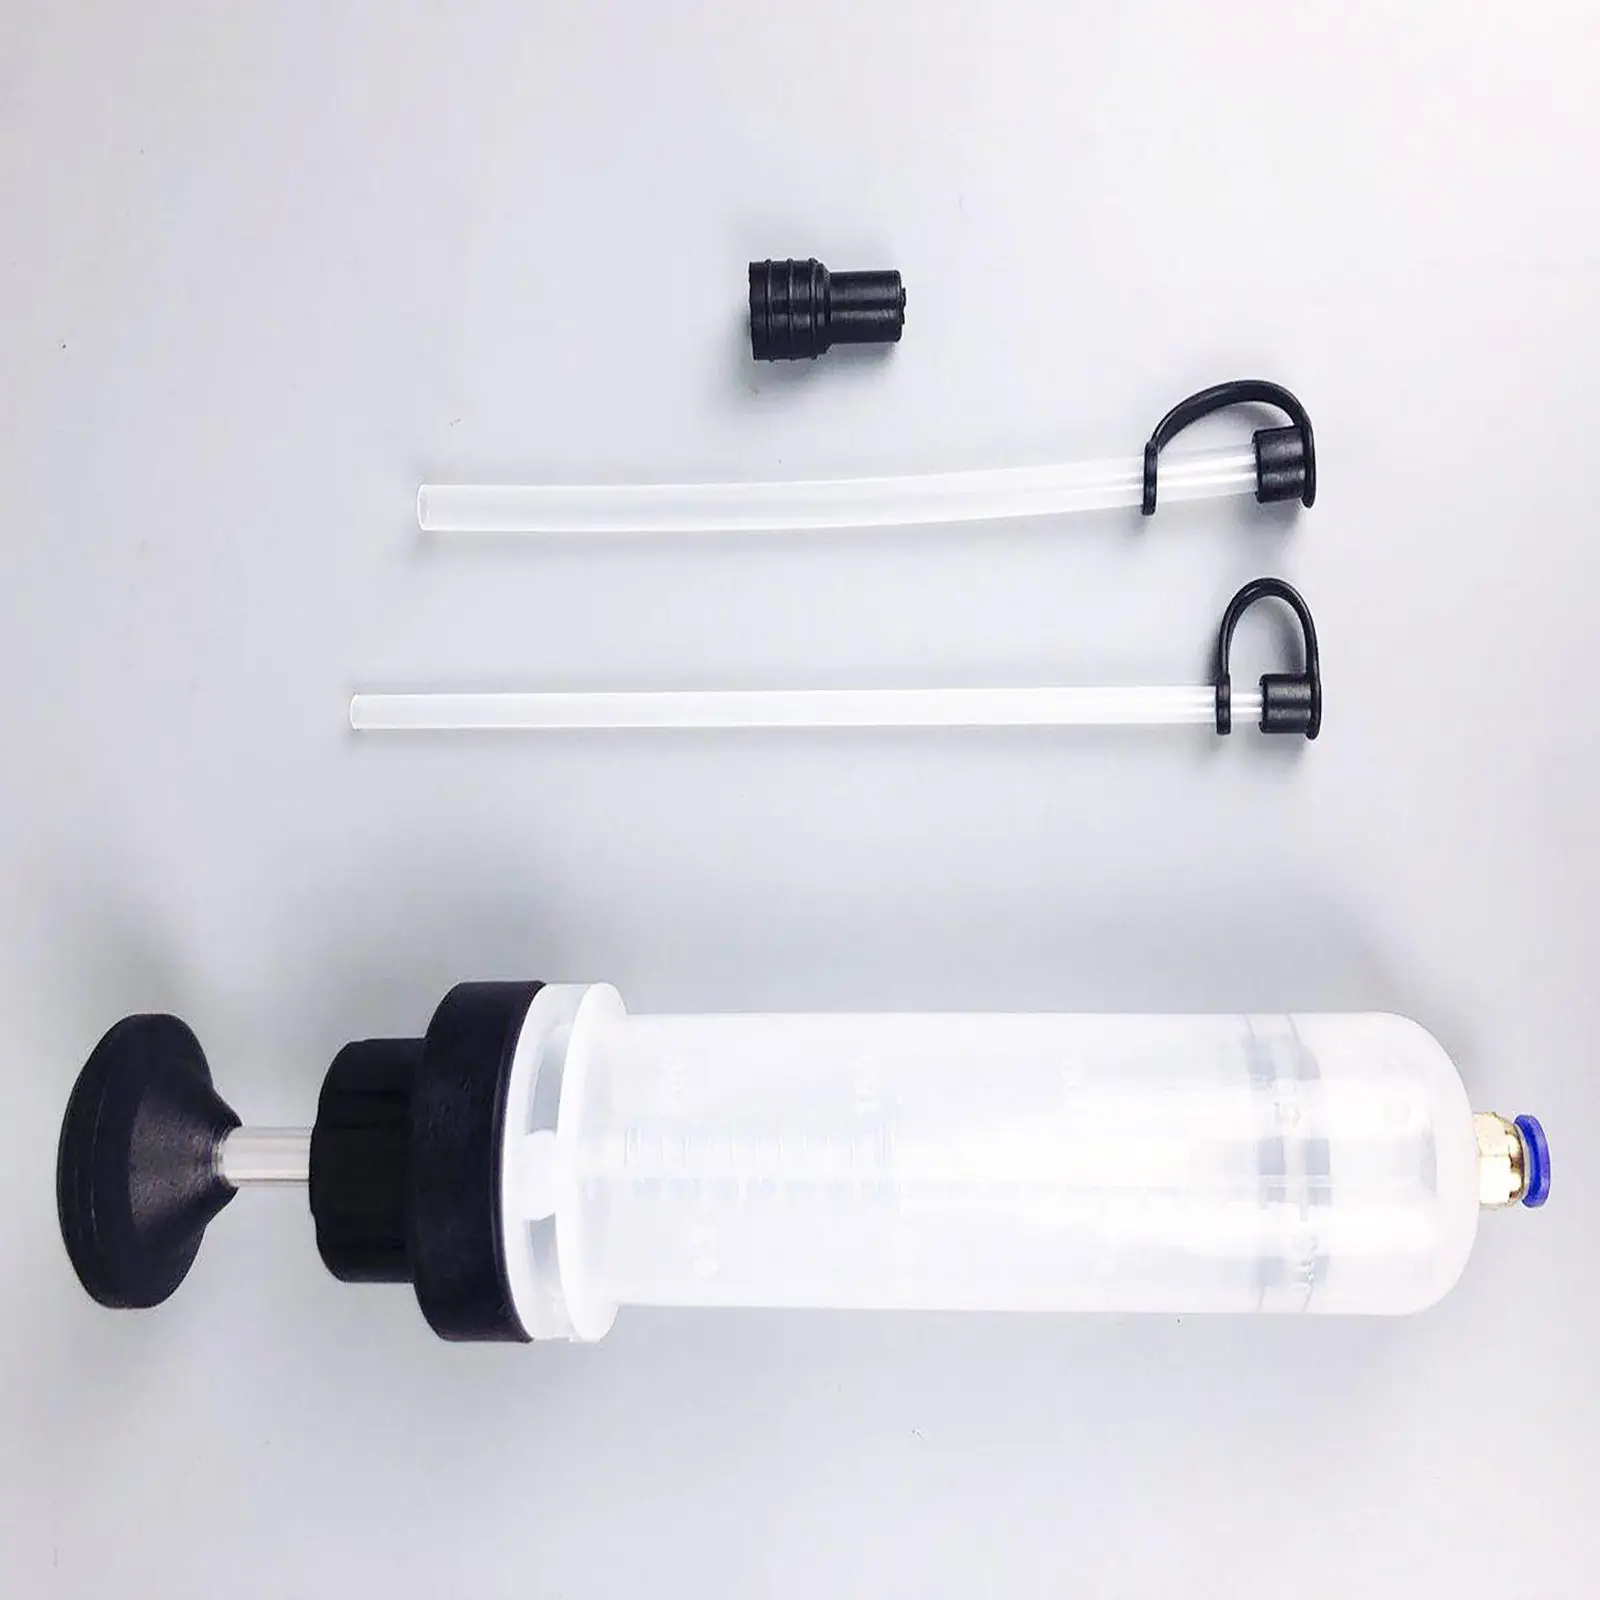 29.5cm Car Automotive Filling Fluid Extractor / Extracting Transmission Hand Pump Complete Kit